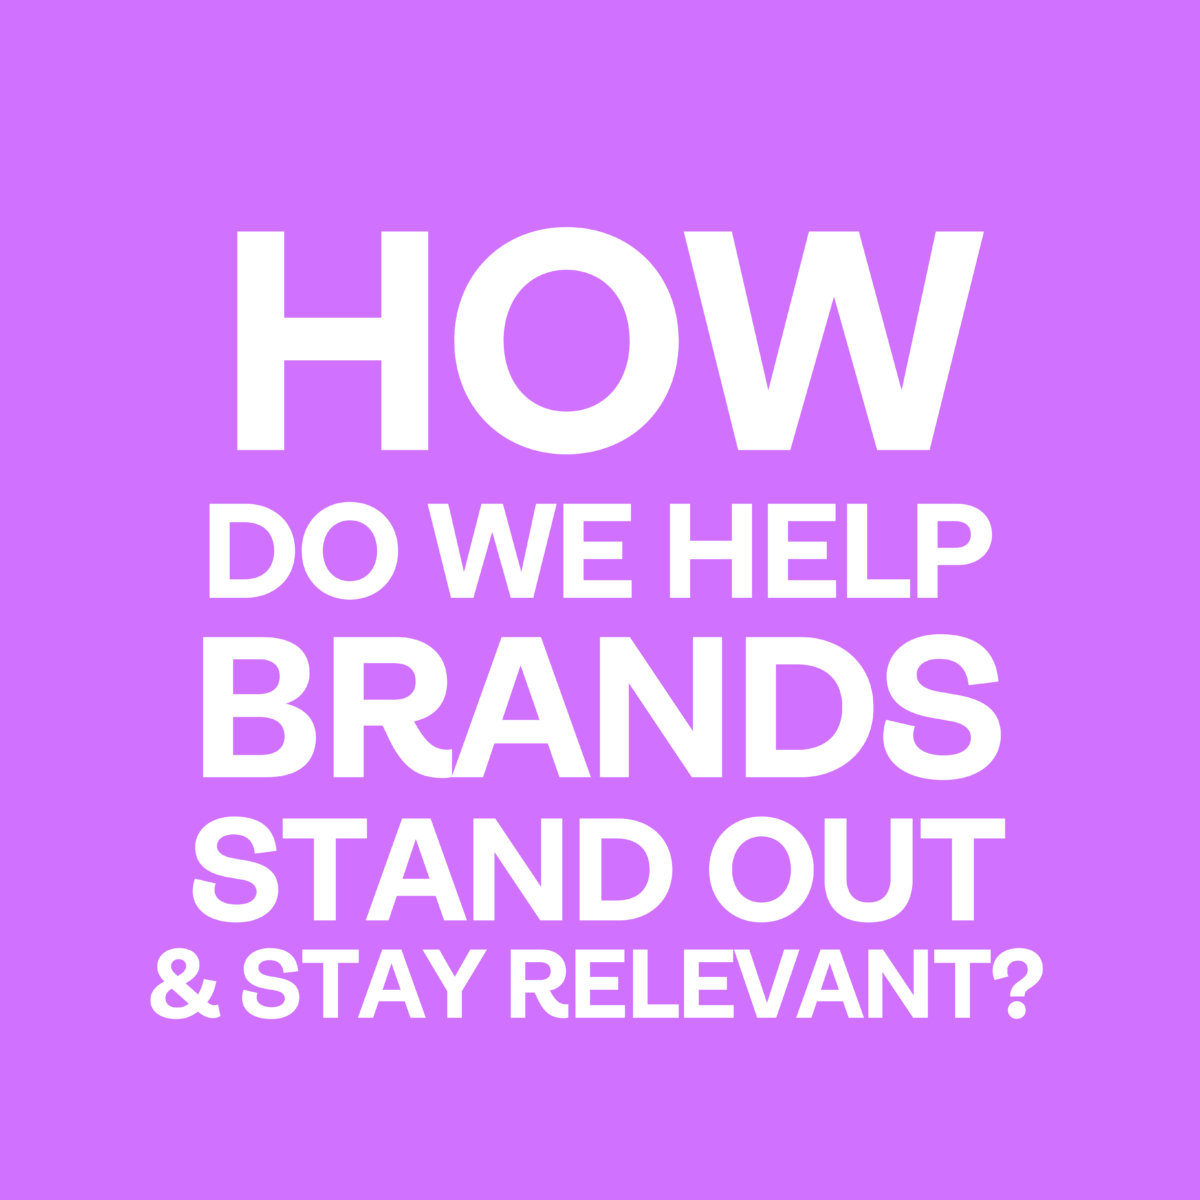 Image of "How We Help Brands Stand Out"